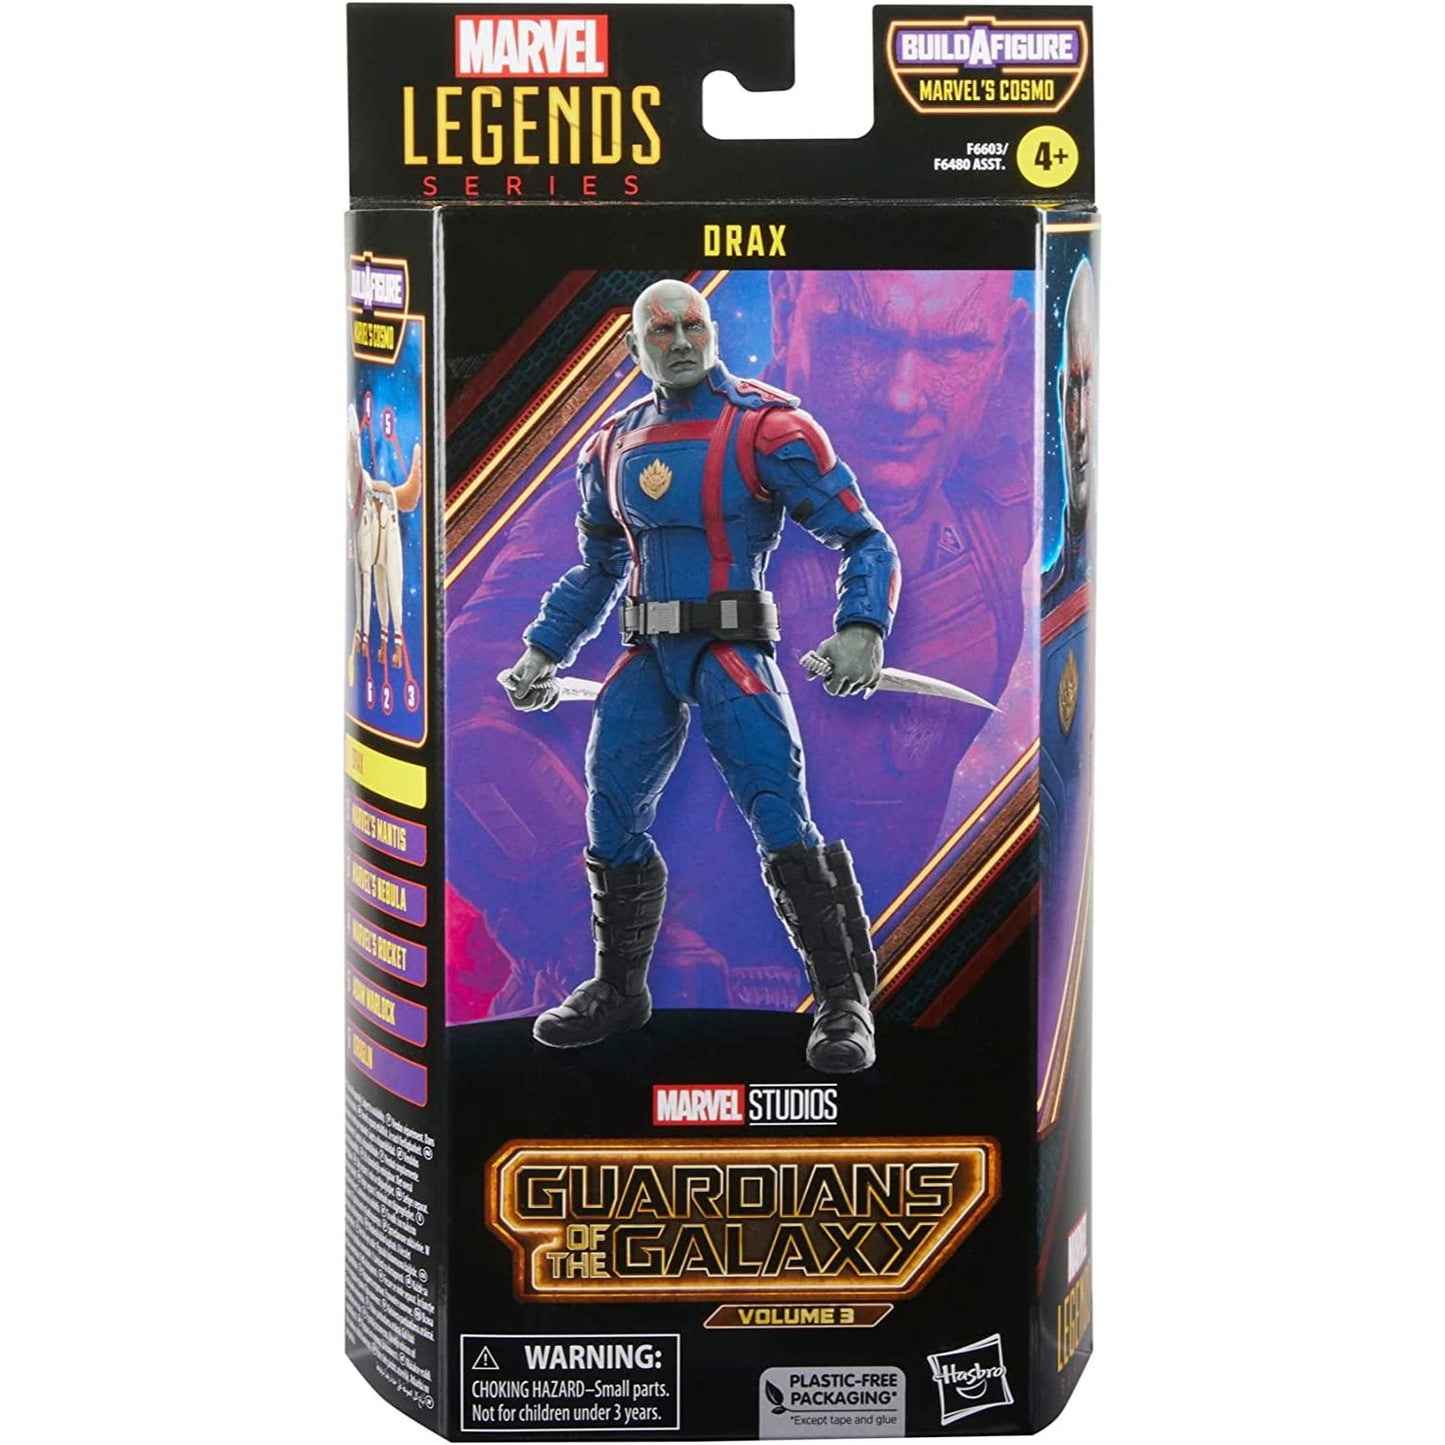 Guardians of the Galaxy Vol. 3 Marvel Legends Drax 6-Inch Action Figure Toy in a Box front view - HERETOSERVEYOU